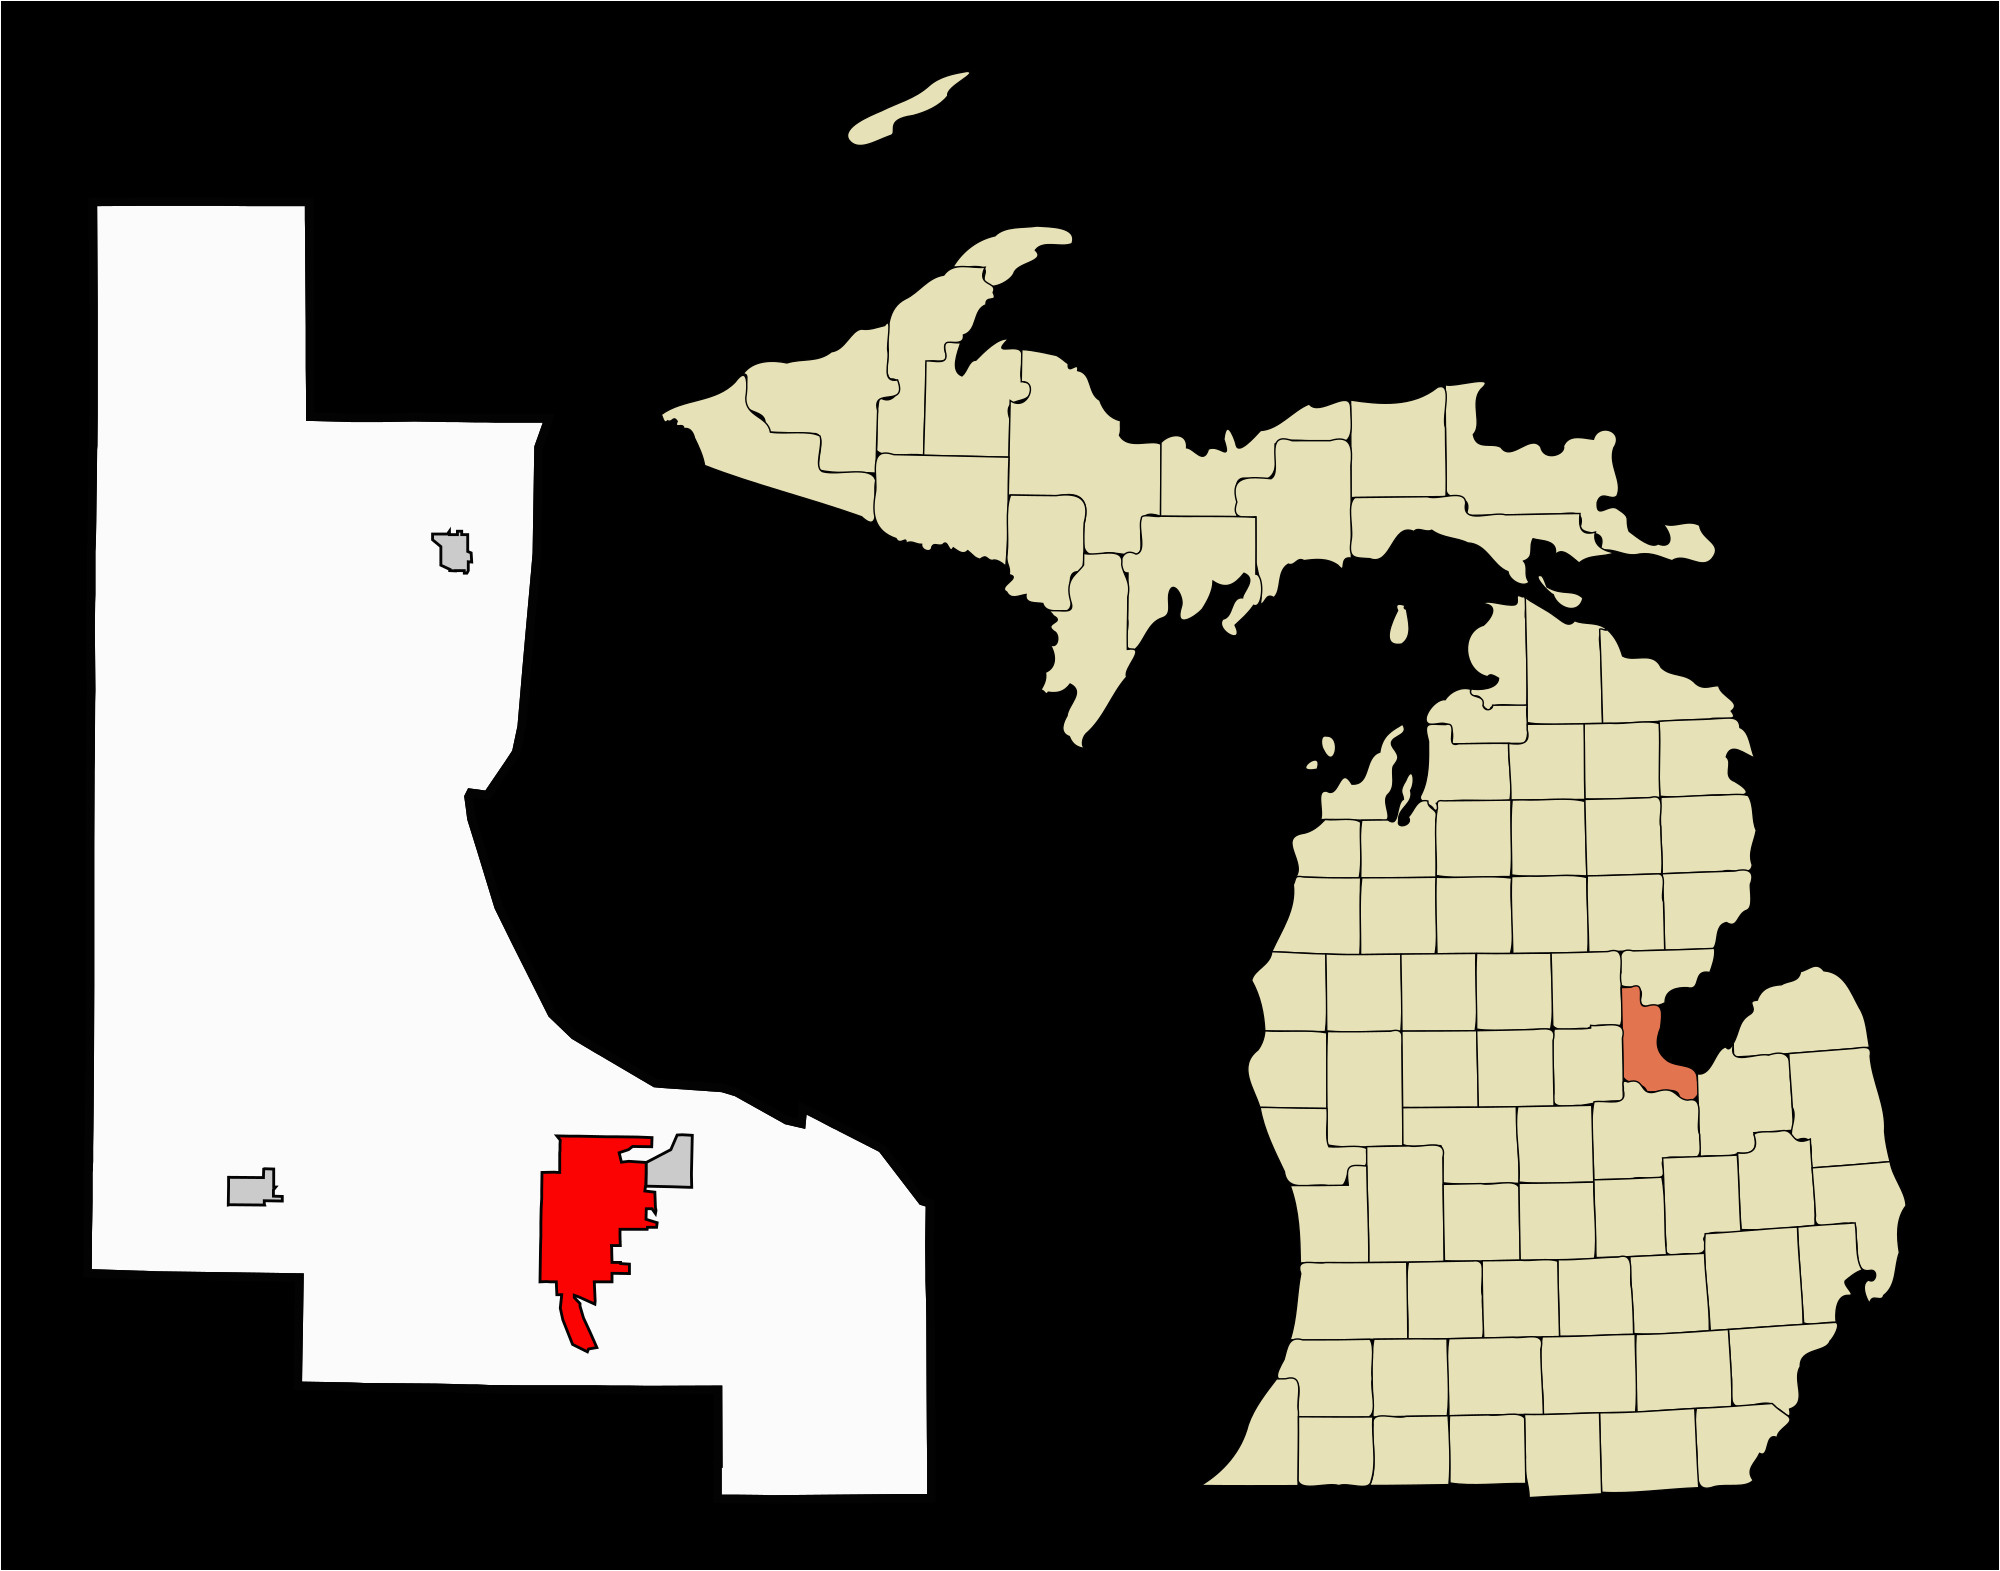 Map Of Michigan by County Datei Bay County Michigan Incorporated and Unincorporated areas Bay